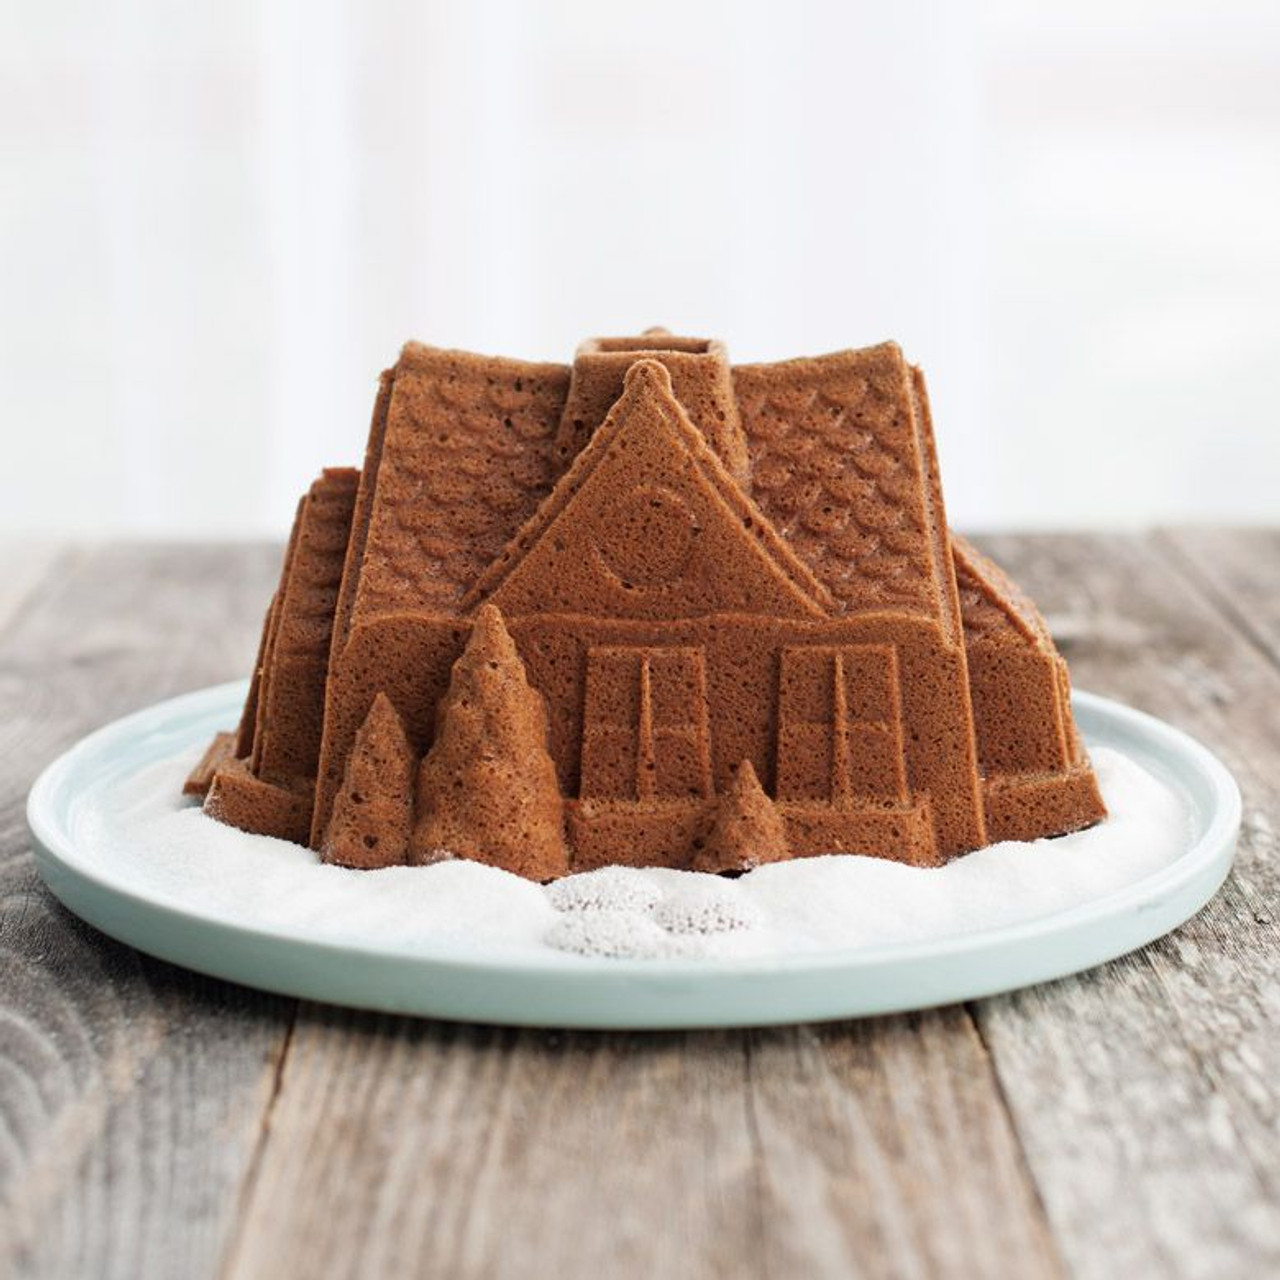 https://cdn11.bigcommerce.com/s-hccytny0od/images/stencil/1280x1280/products/730/3971/nordic-ware-gingerbread-house-bundt-pan-1__38477.1514678642.jpg?c=2?imbypass=on